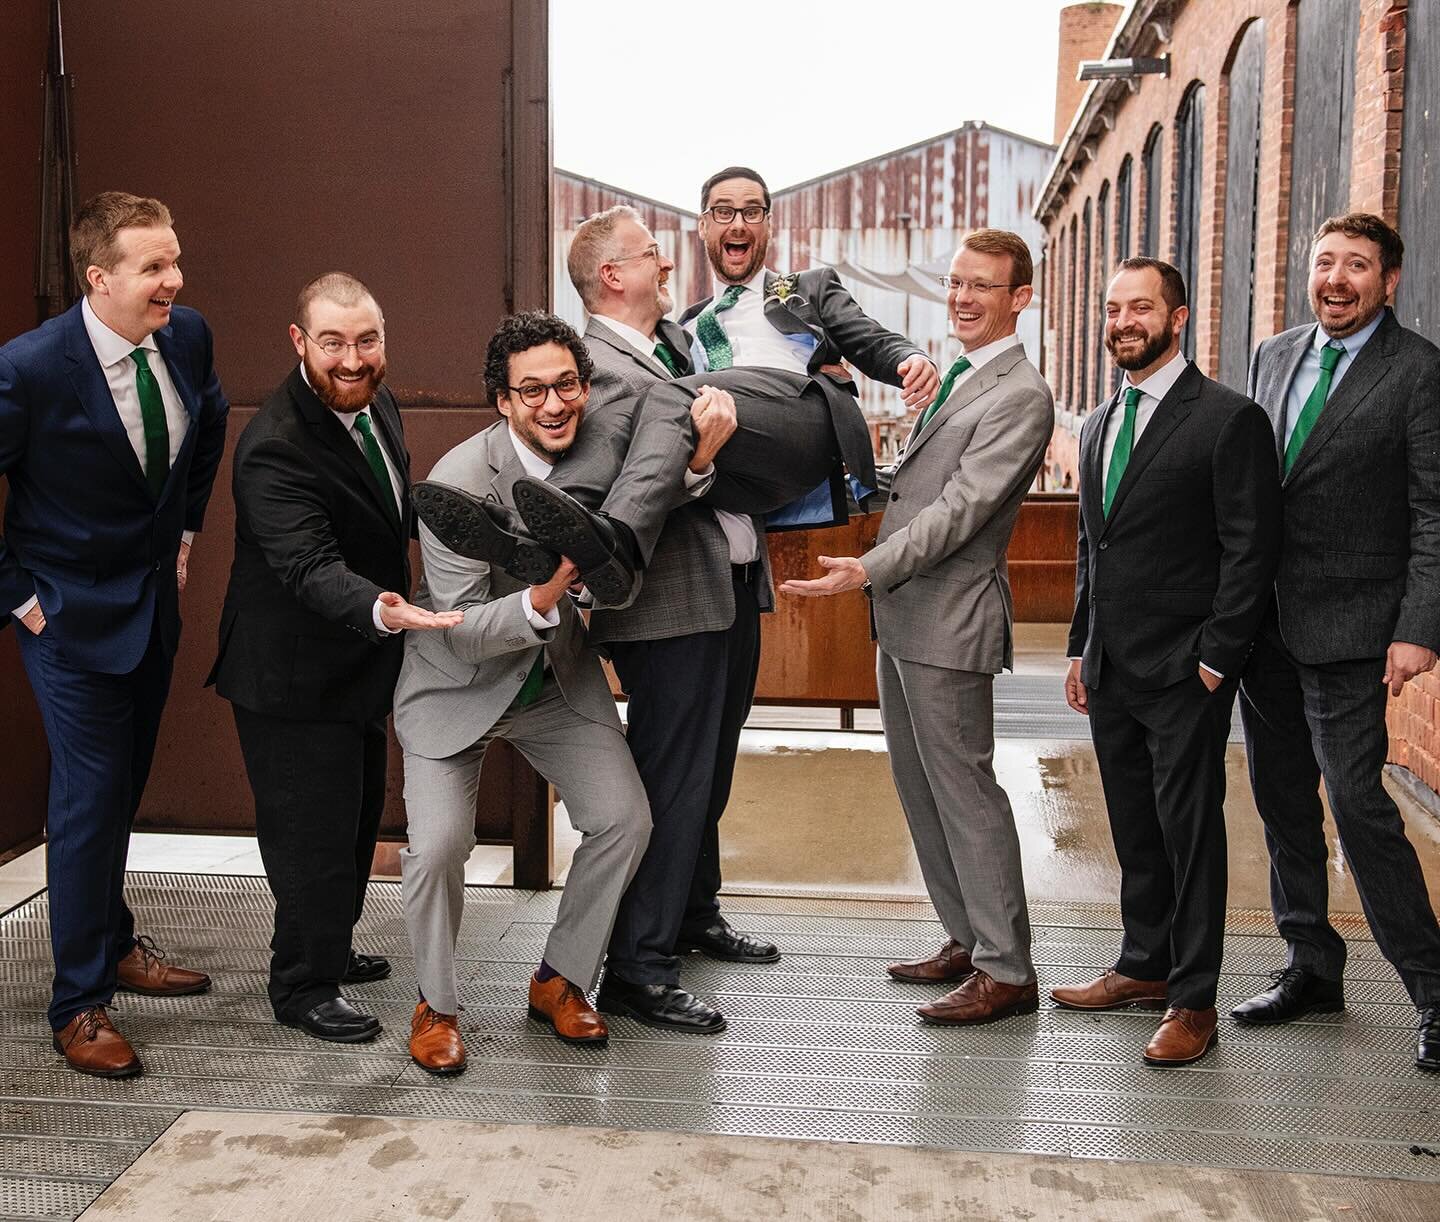 Happy St Patrick&rsquo;s Day from gWorks!

What better way to celebrate than surrounded by friends and family? We loved reminiscing on Katie and Mark&rsquo;s beautiful wedding at gWorks, with their verdant bridal party palette set against stunning ra